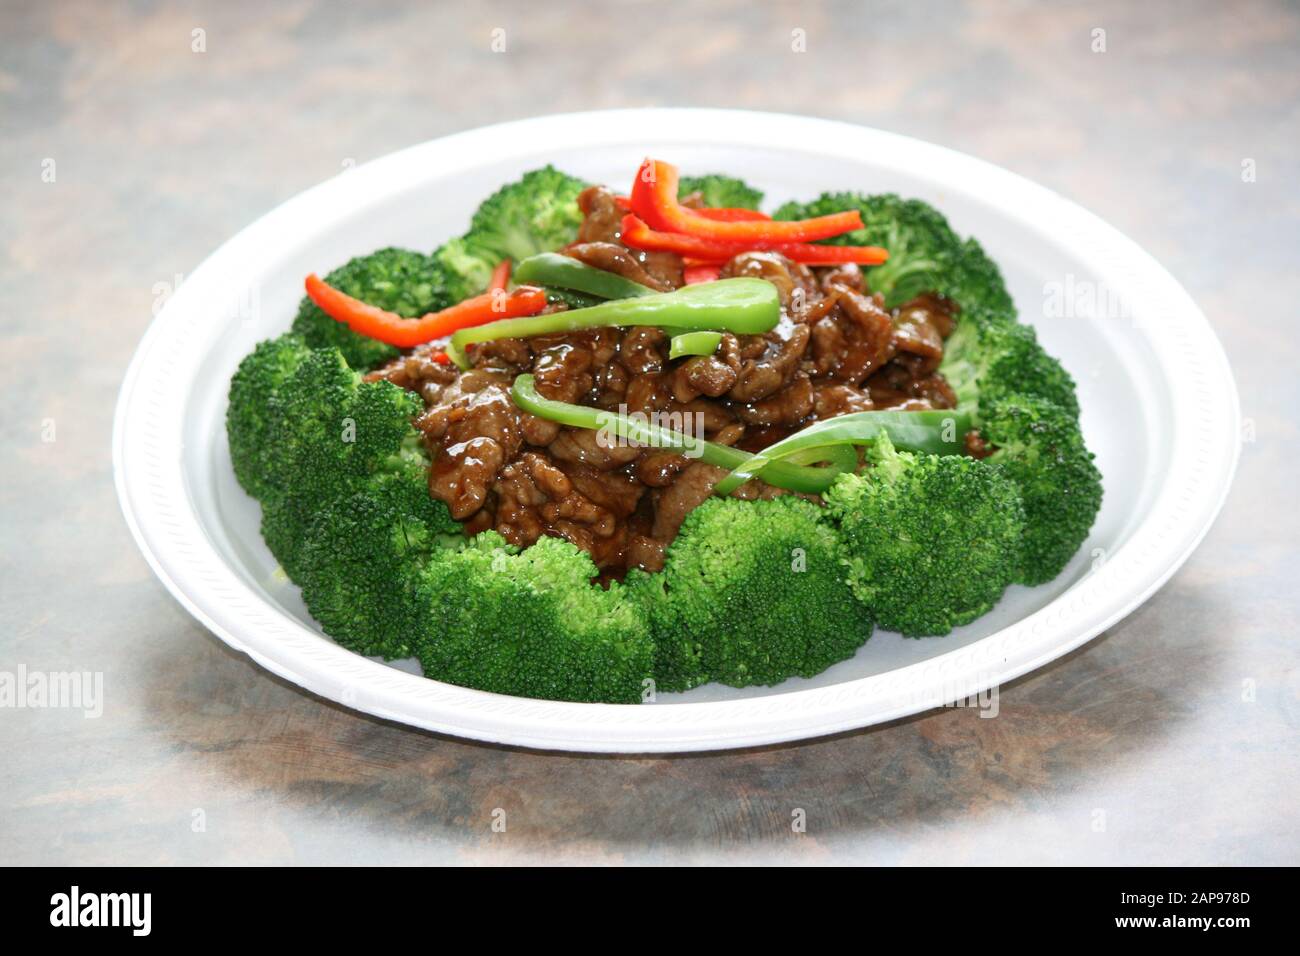 Asian or Chinese food dishes or stir fries at take out or eat in restaurant Stock Photo